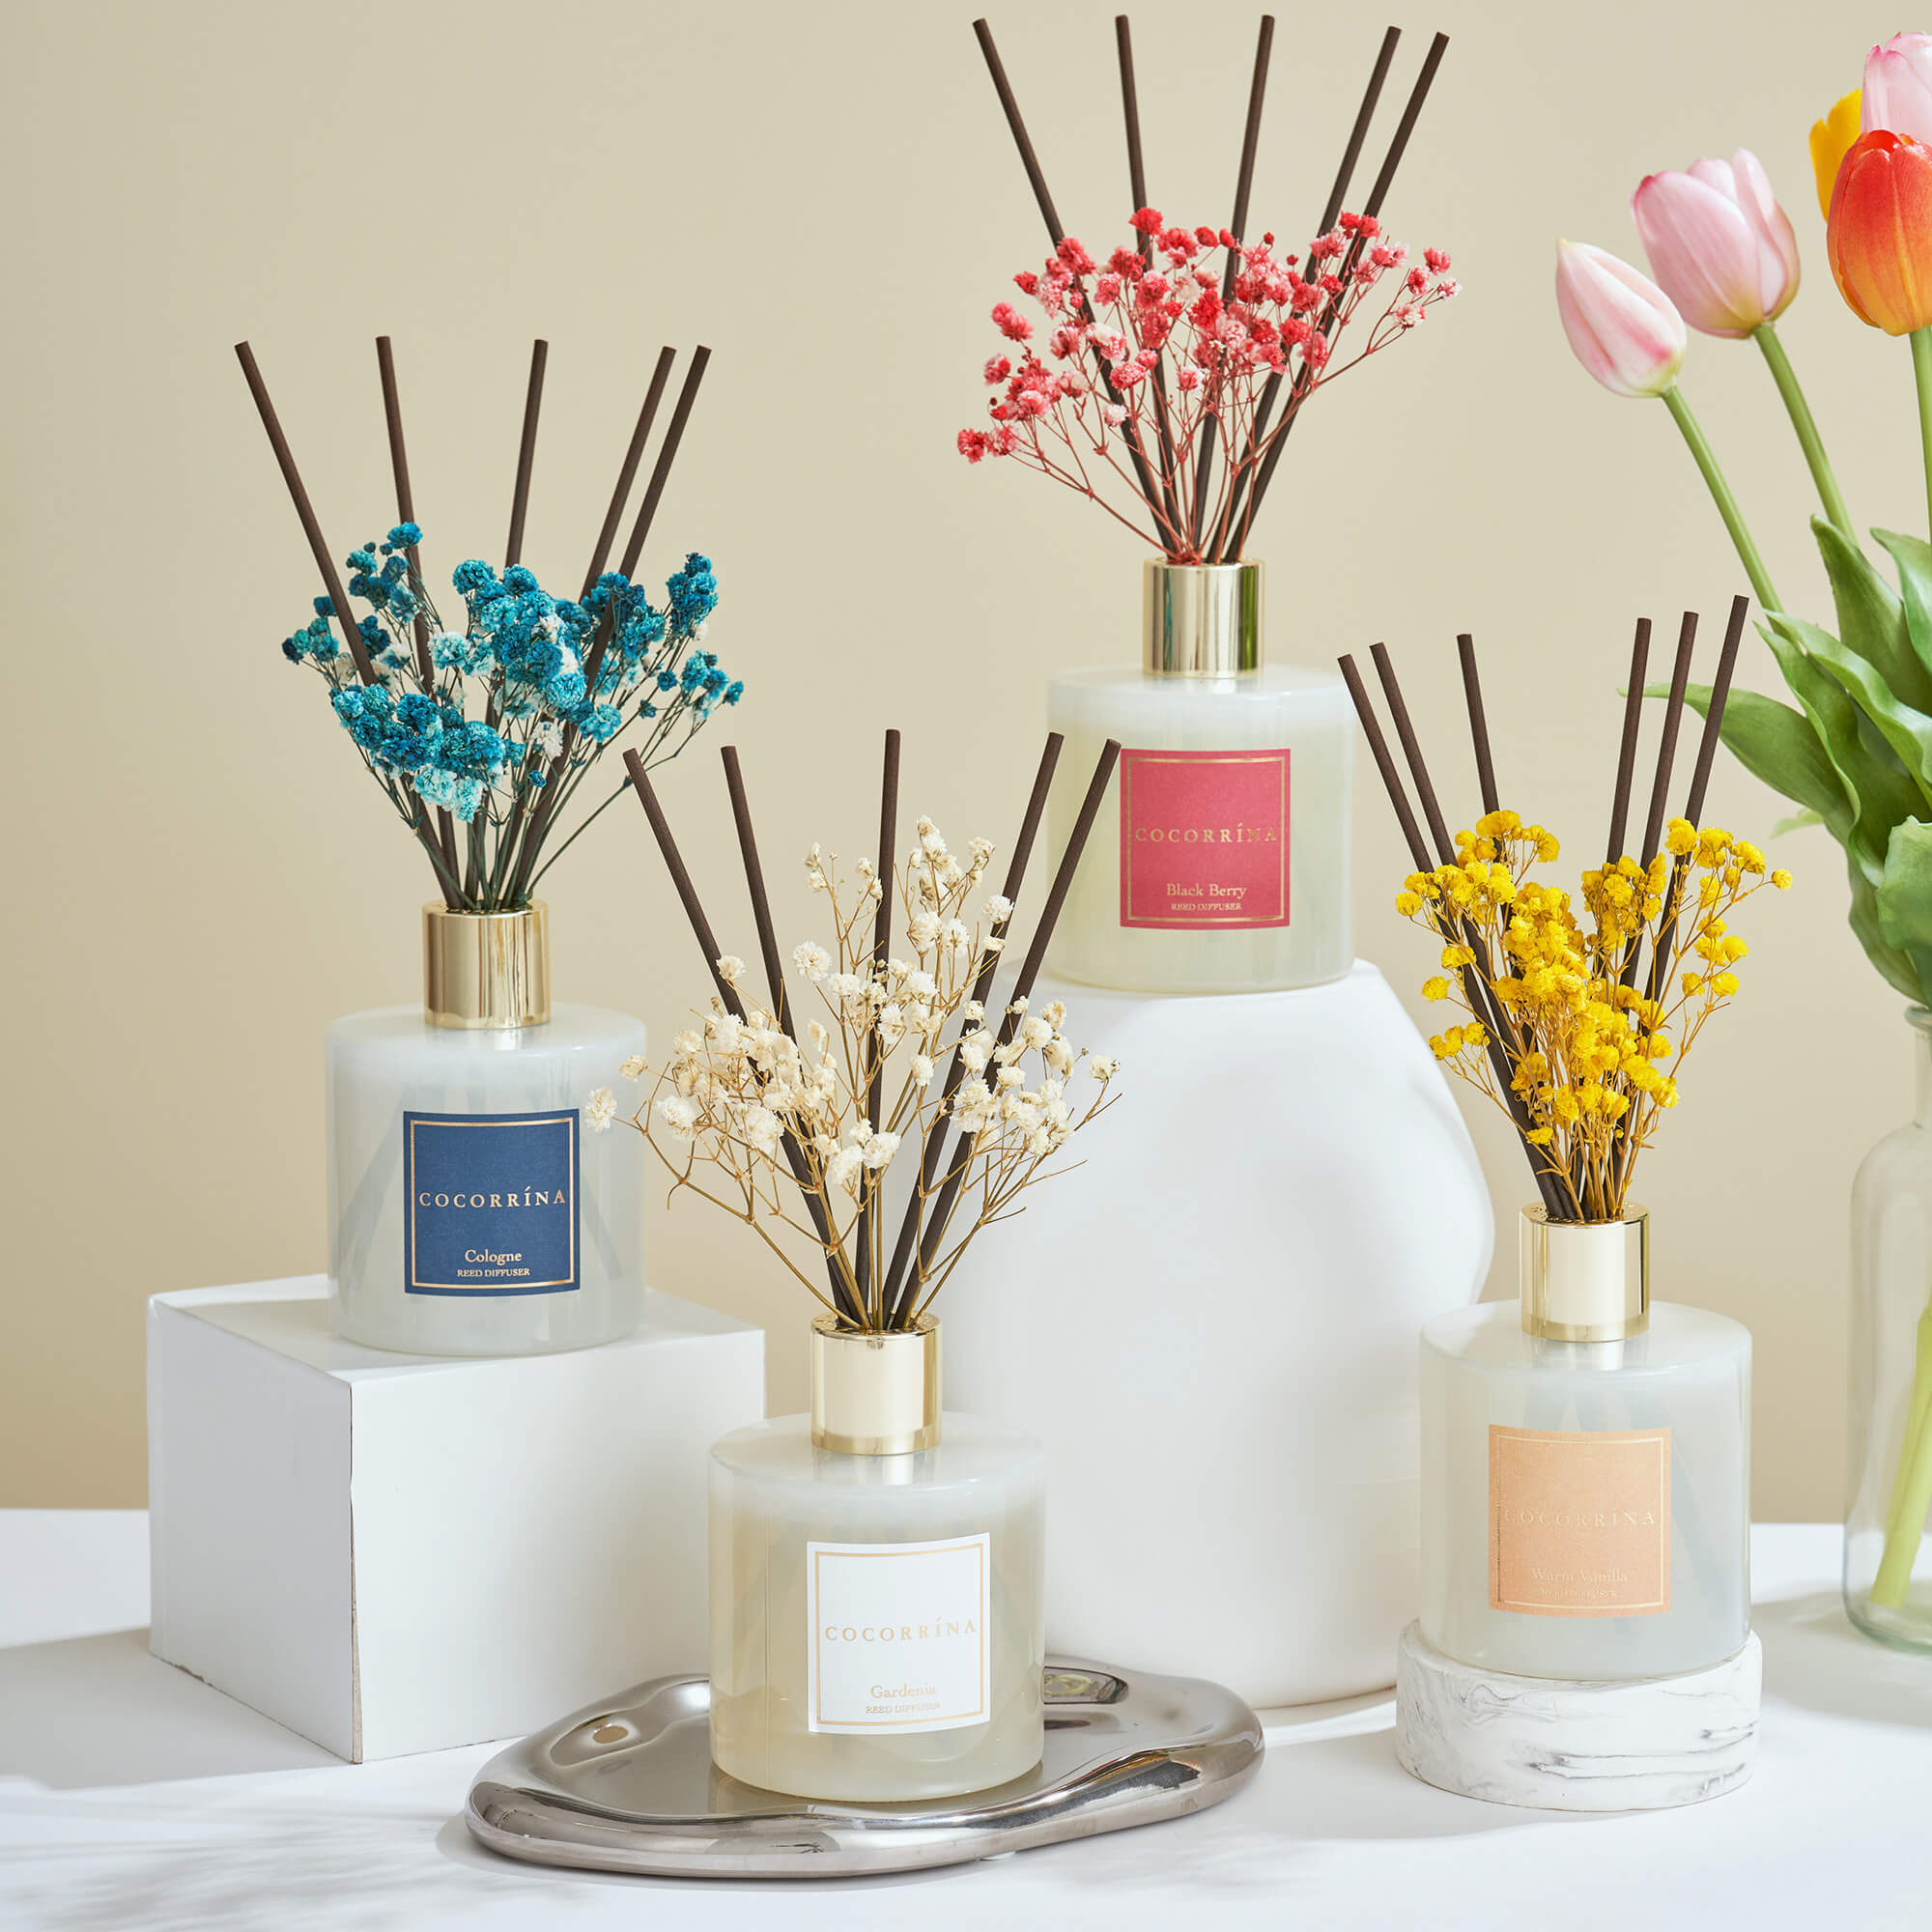 COCORRÍNA Cologne Reed Diffuser Set